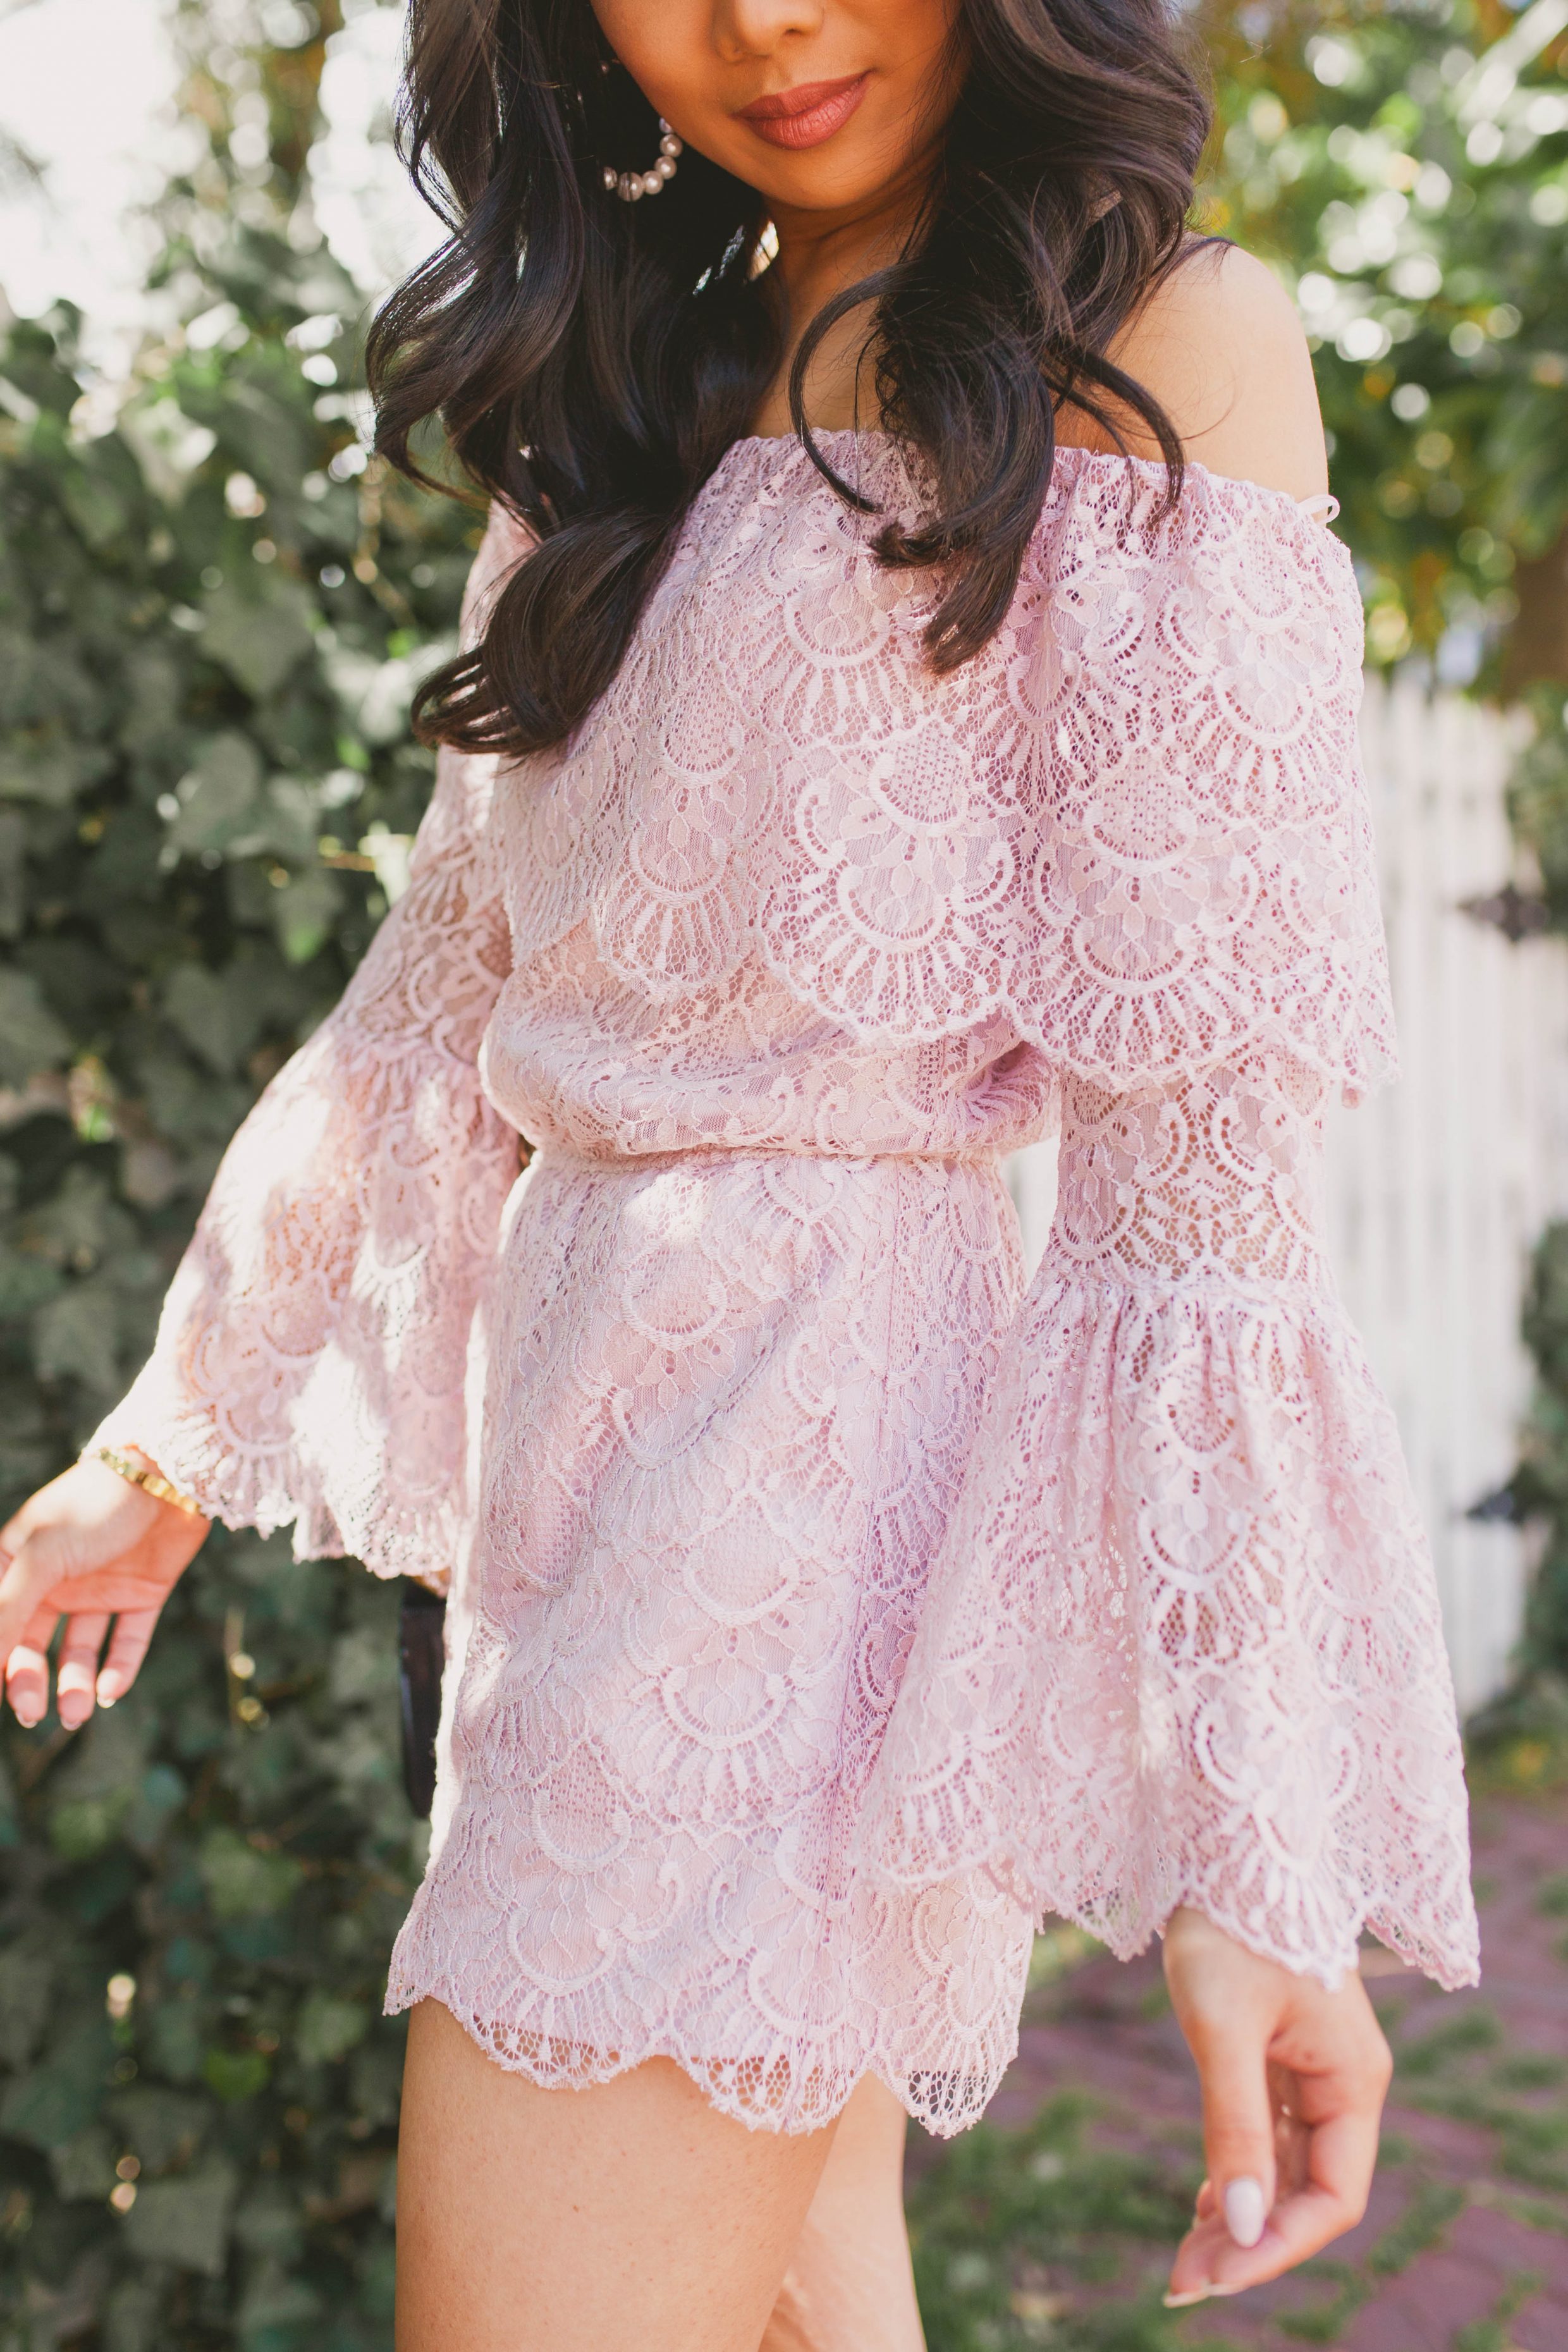 Hoang-Kim wears a blush lace off-the-shoulder romper with pearl hoop earrings